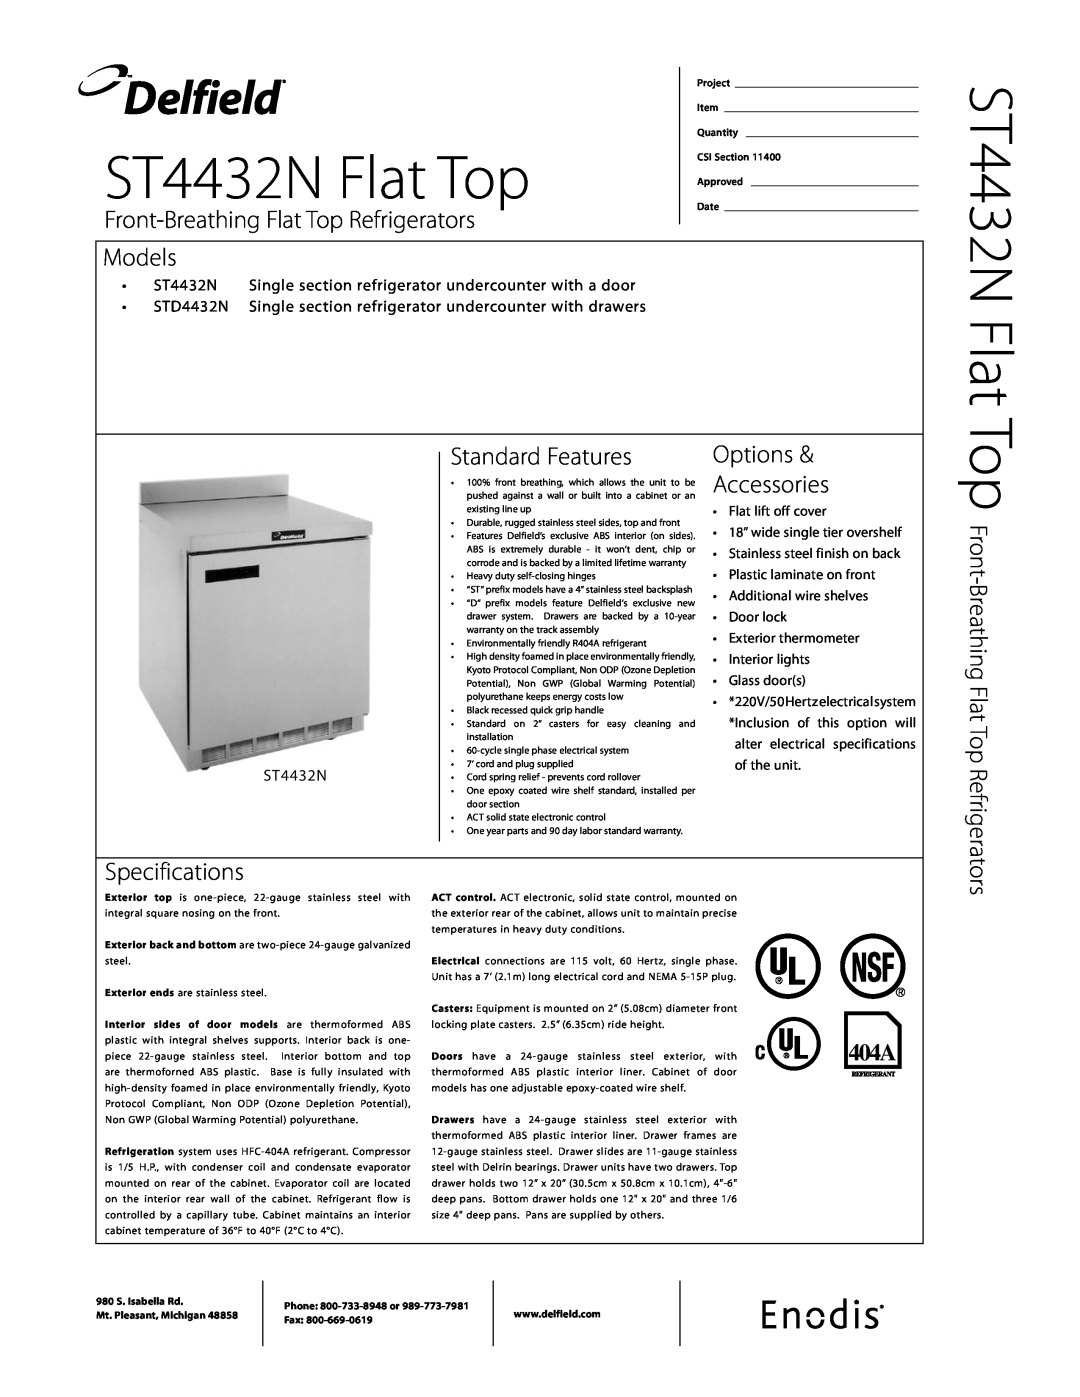 Delfield specifications ST4432N Single section refrigerator undercounter with a door, ST4432N Flat Top, Delfield 